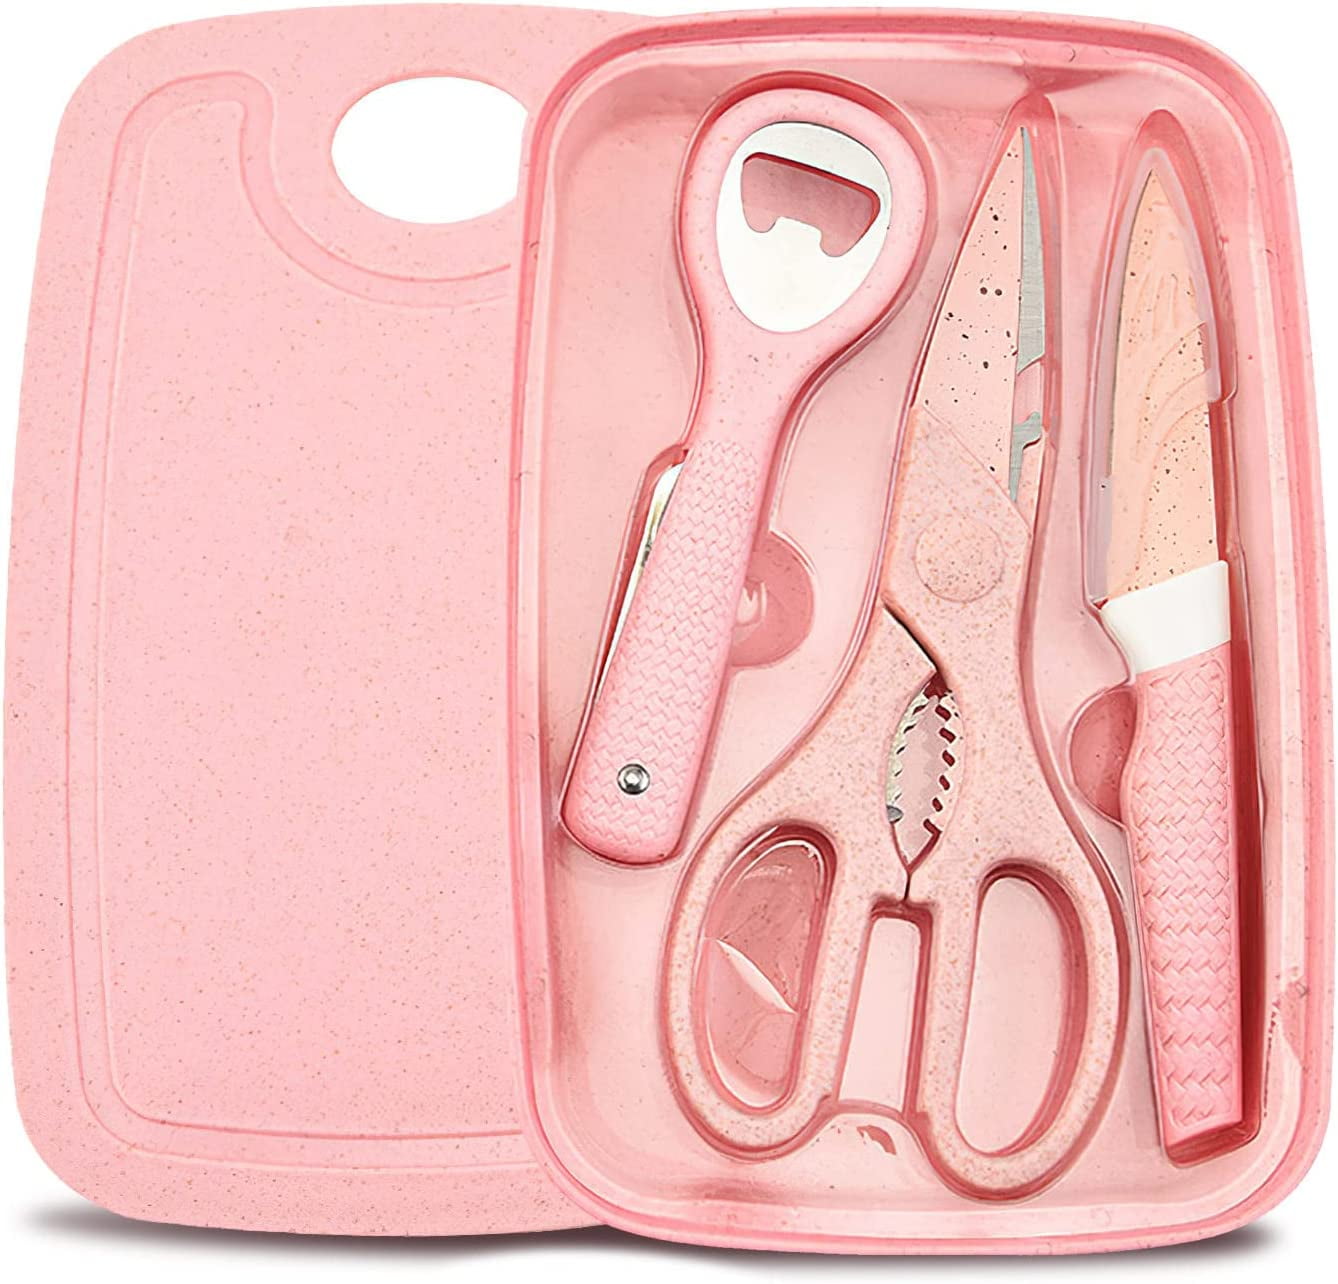 Set of 4 pc Kitchen Cutting Board Mats Slip Grip and Knife Pink Color  Utensils and 2pc set of Salt and Pepper Shaker Glass Condiments Container  for